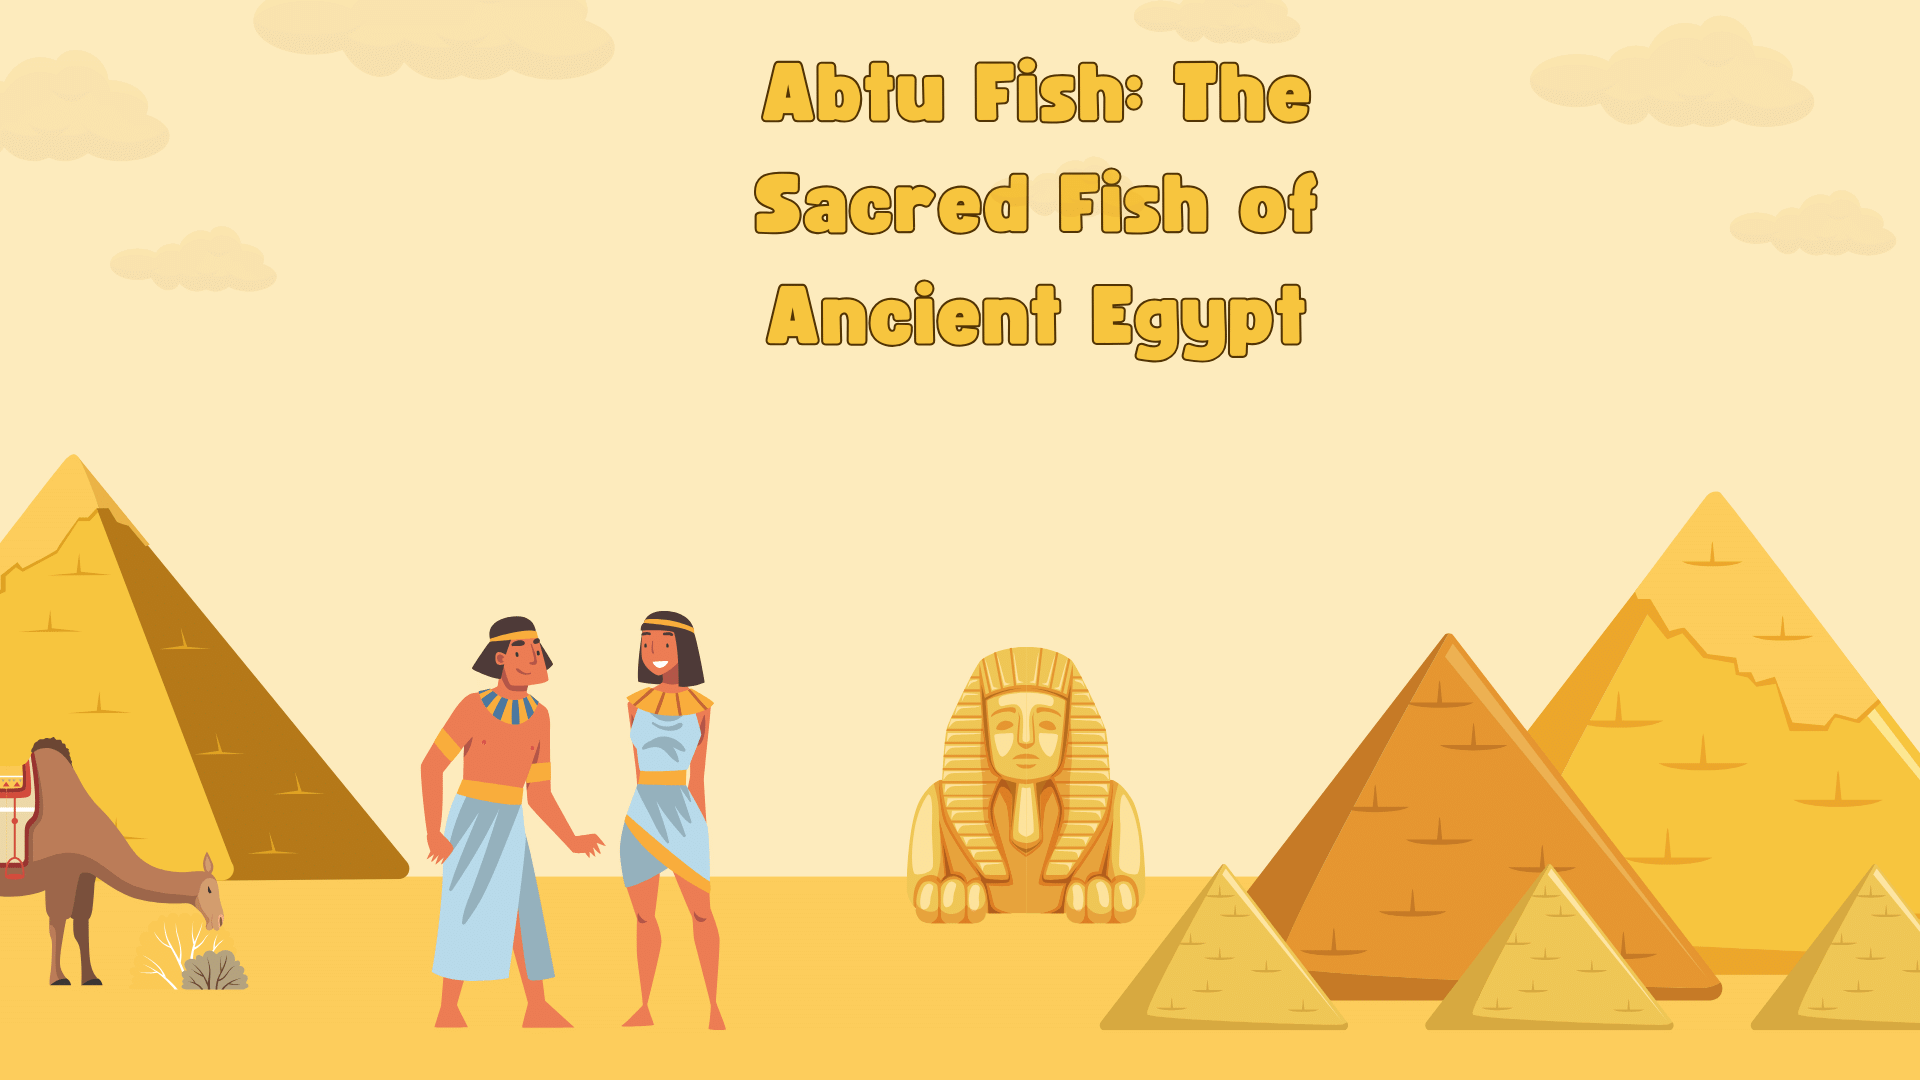 Abtu Fish: The Sacred Fish of Ancient Egypt